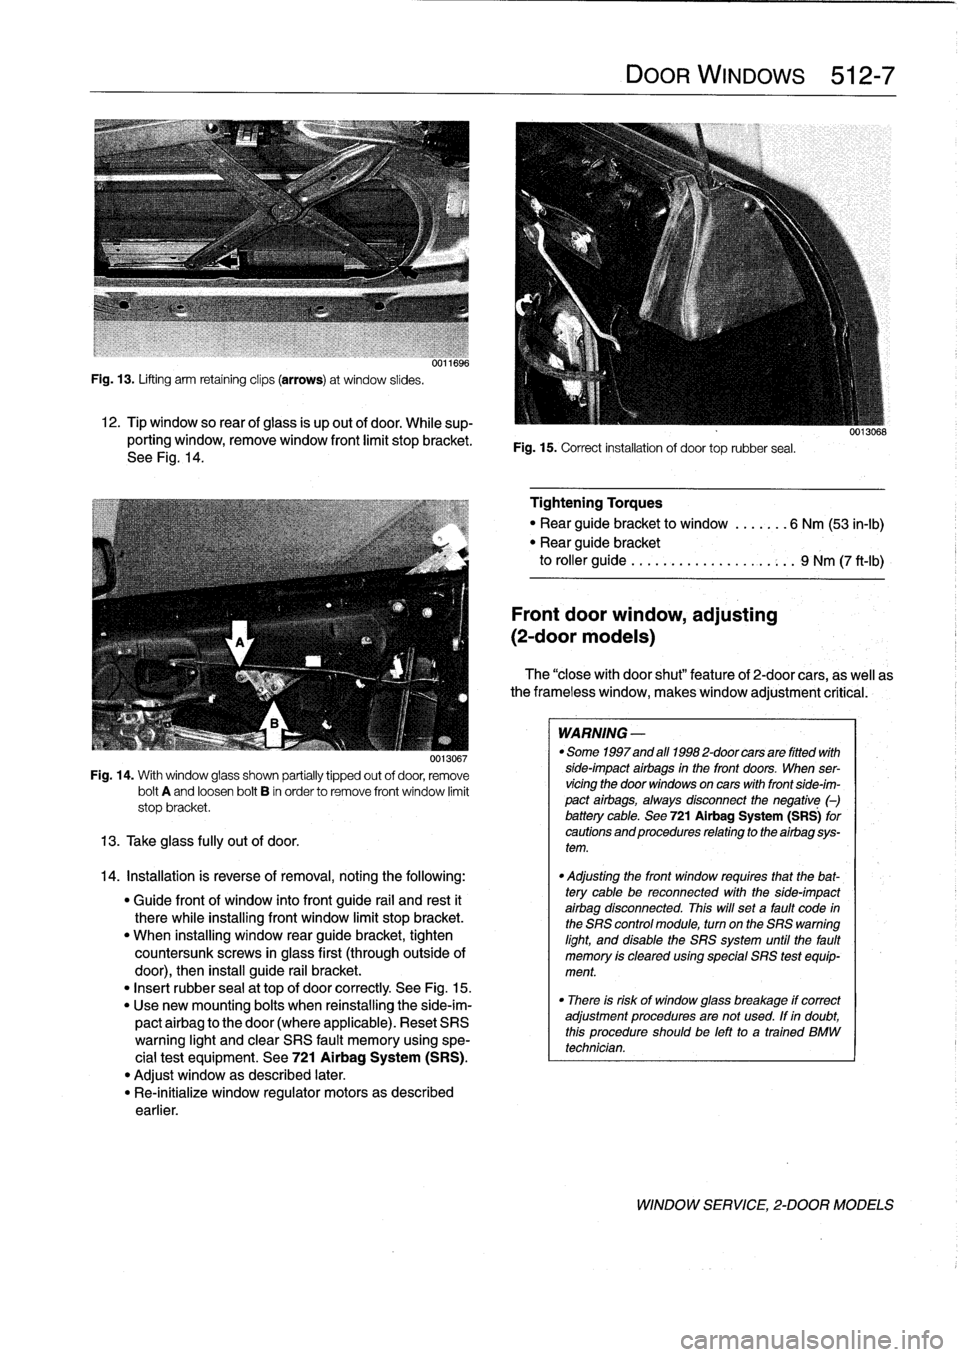 BMW 318i 1997 E36 Workshop Manual 
Fig
.
13
.
Lifting
arm
retaining
clips
(arrows)
at
window
slides
.

12
.
Tip
window
so
rear
ofglass
is
up
out
of
door
.
While
sup-
porting
window,
remove
window
front
limit
stopbracket
.
See
Fig
.
14